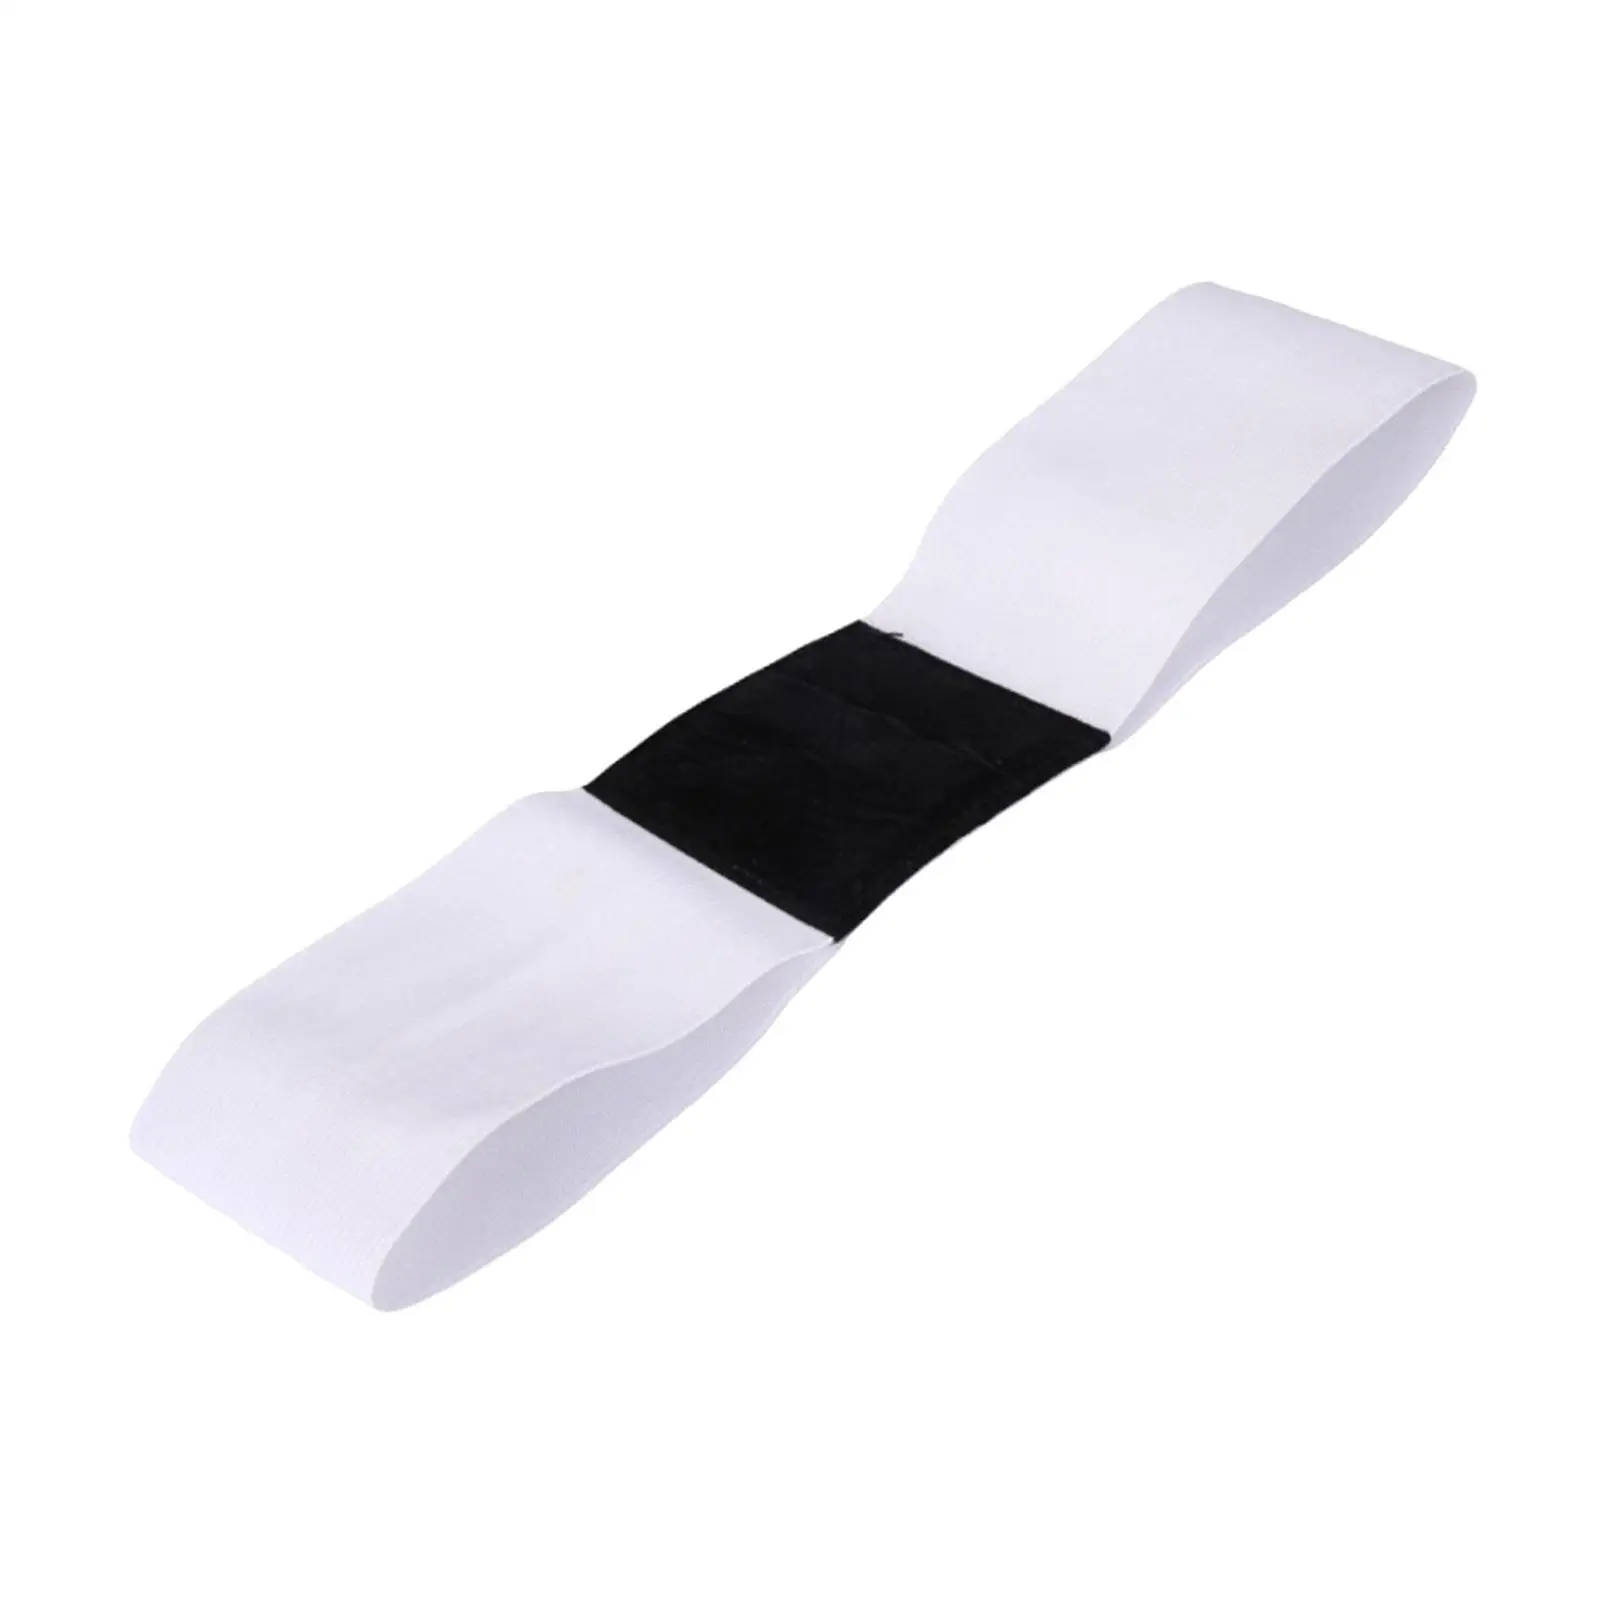 

Golf Swing Training Aid Correcting Arm Band to Forming The Correct Muscle Memory Alignment Practice Golf Accessories